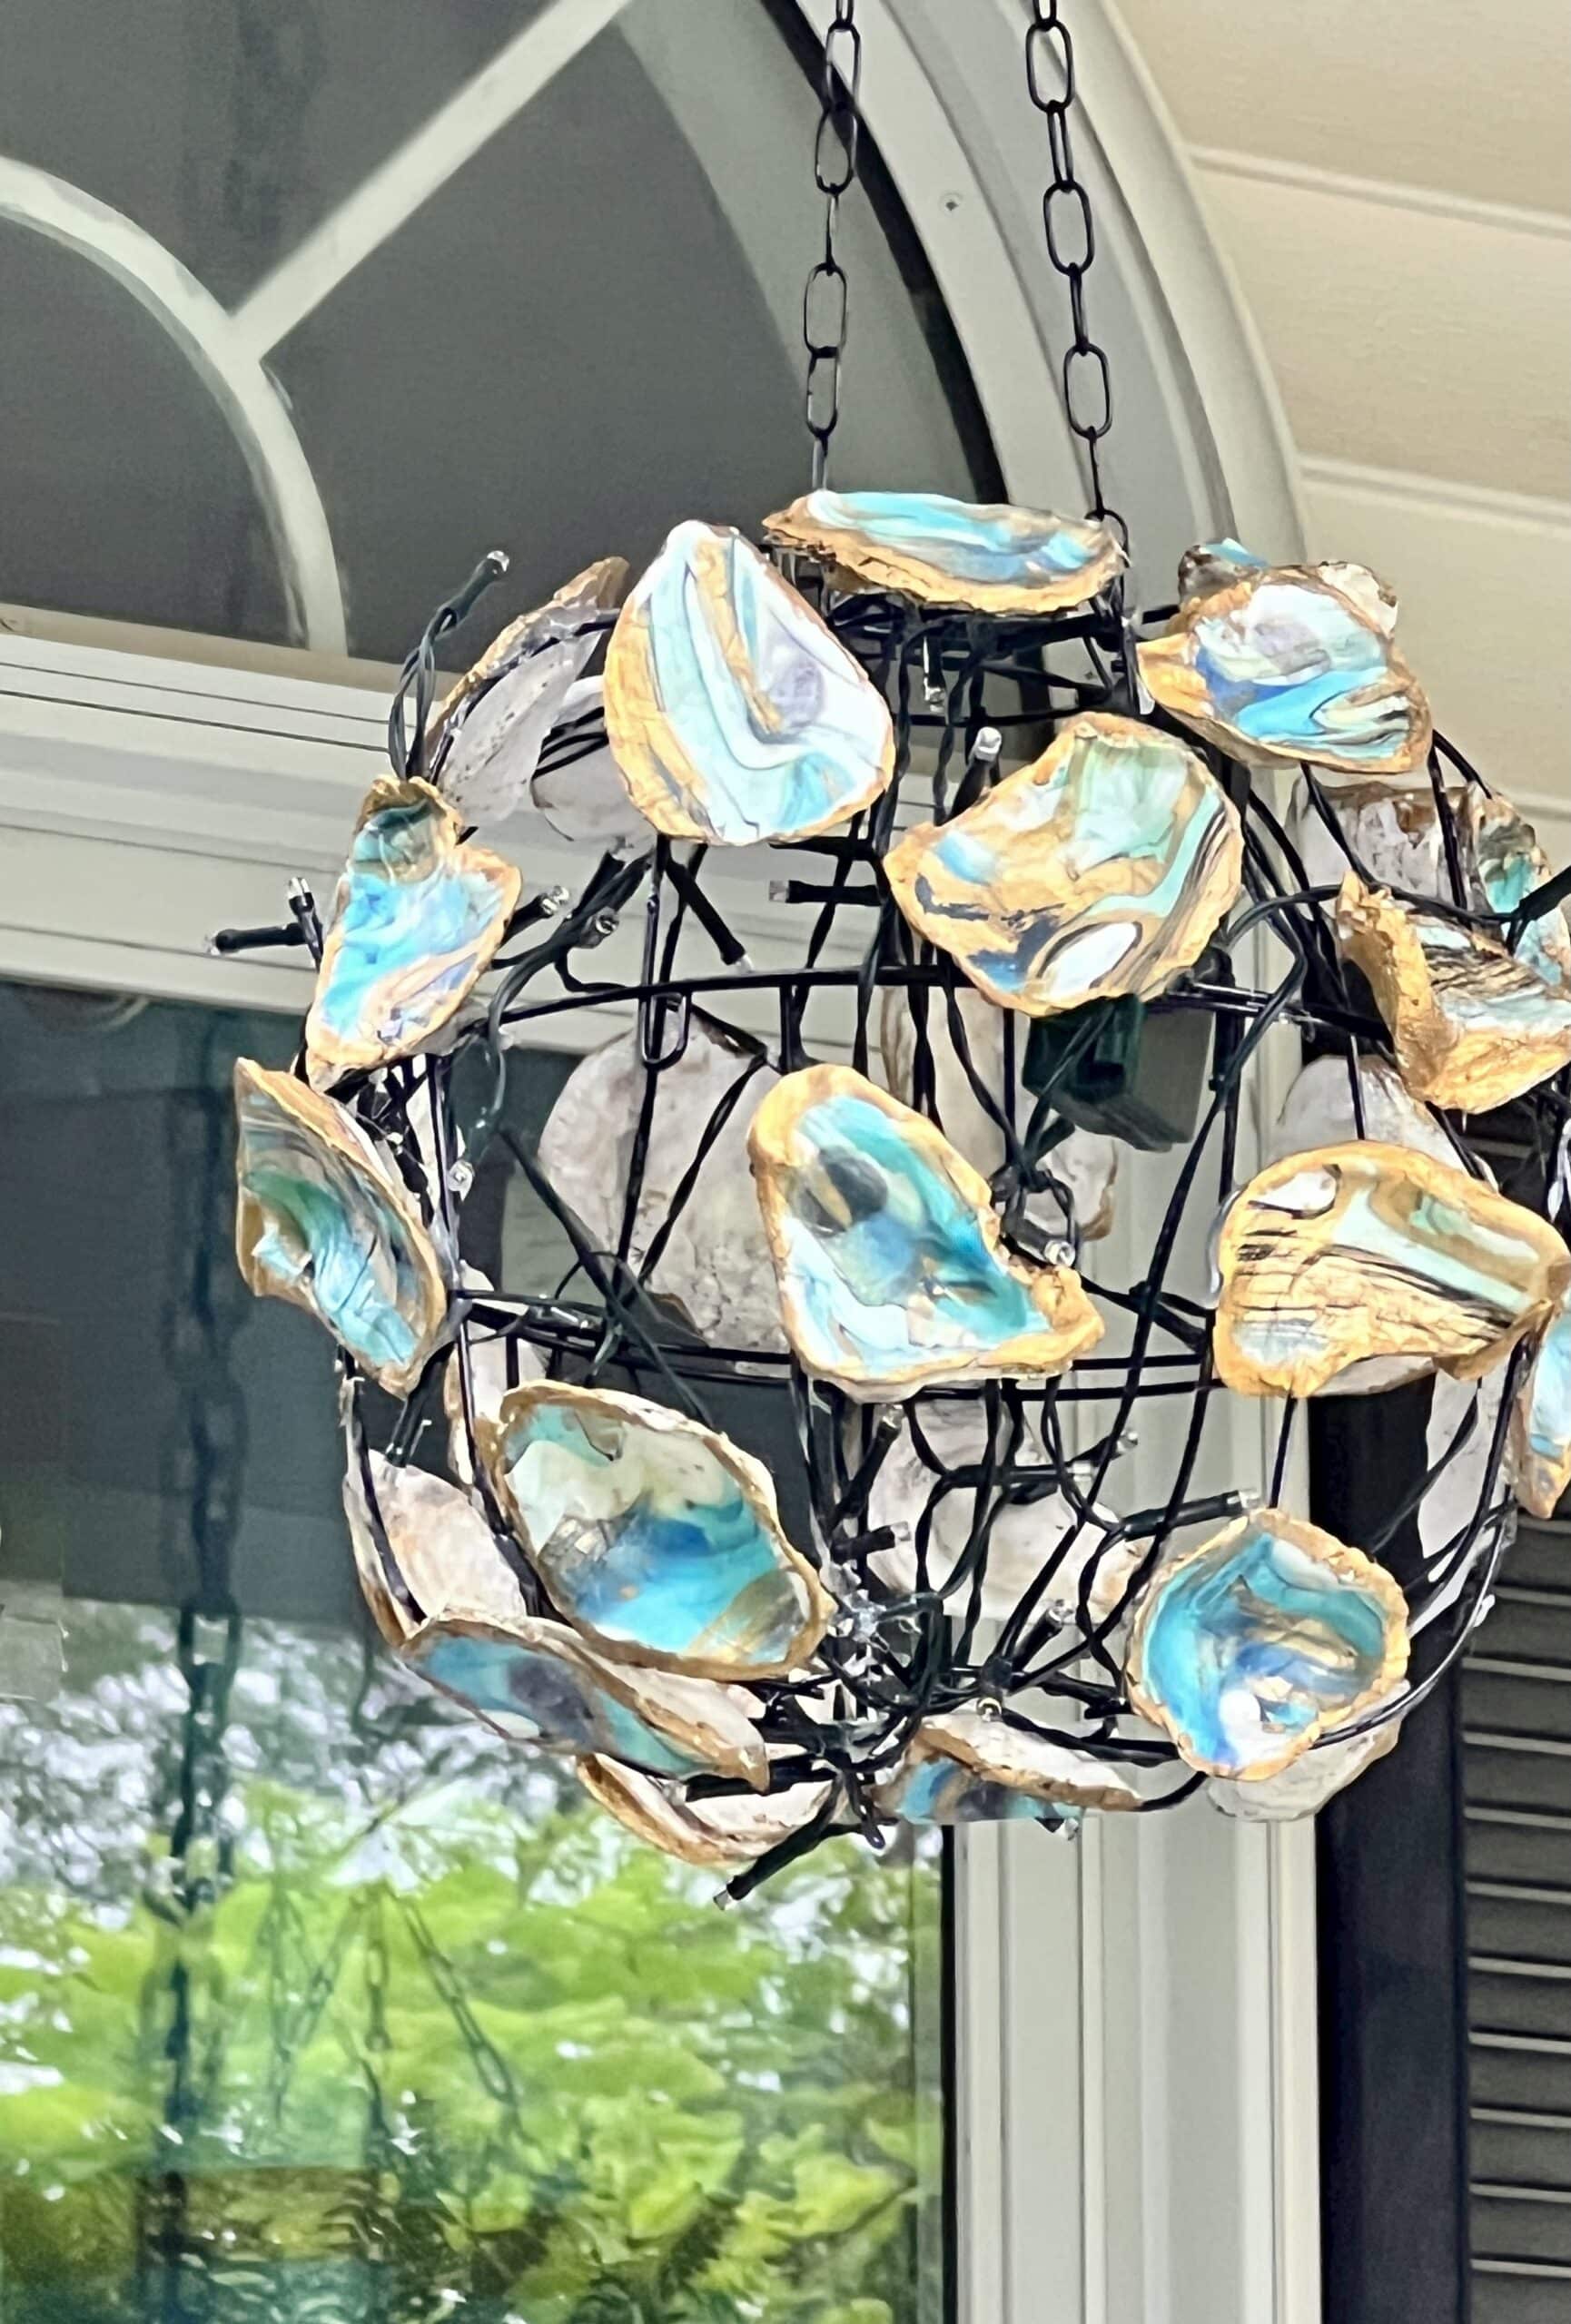 How to Make a Twinkling DIY Oyster Shell Chandelier - Sonata Home Design